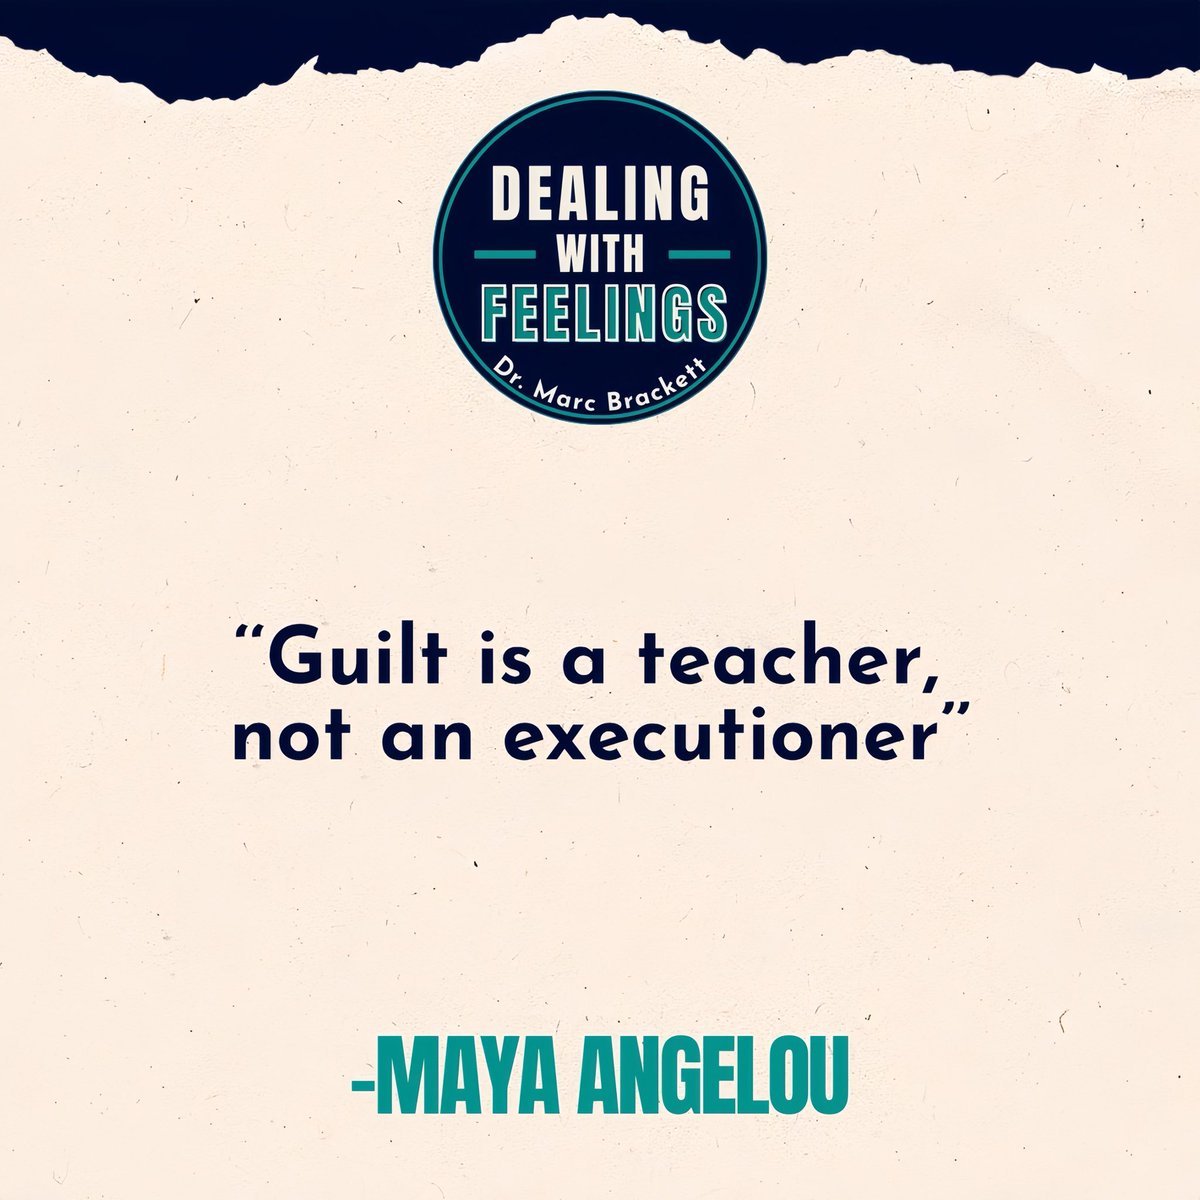 Some argue that guilt can be a powerful motivator for positive change, while others believe it can lead to self-destructive behavior.  For instance, imagine a situation where someone feels guilty about a mistake and uses it as a driving force to make amends and grow. On the…